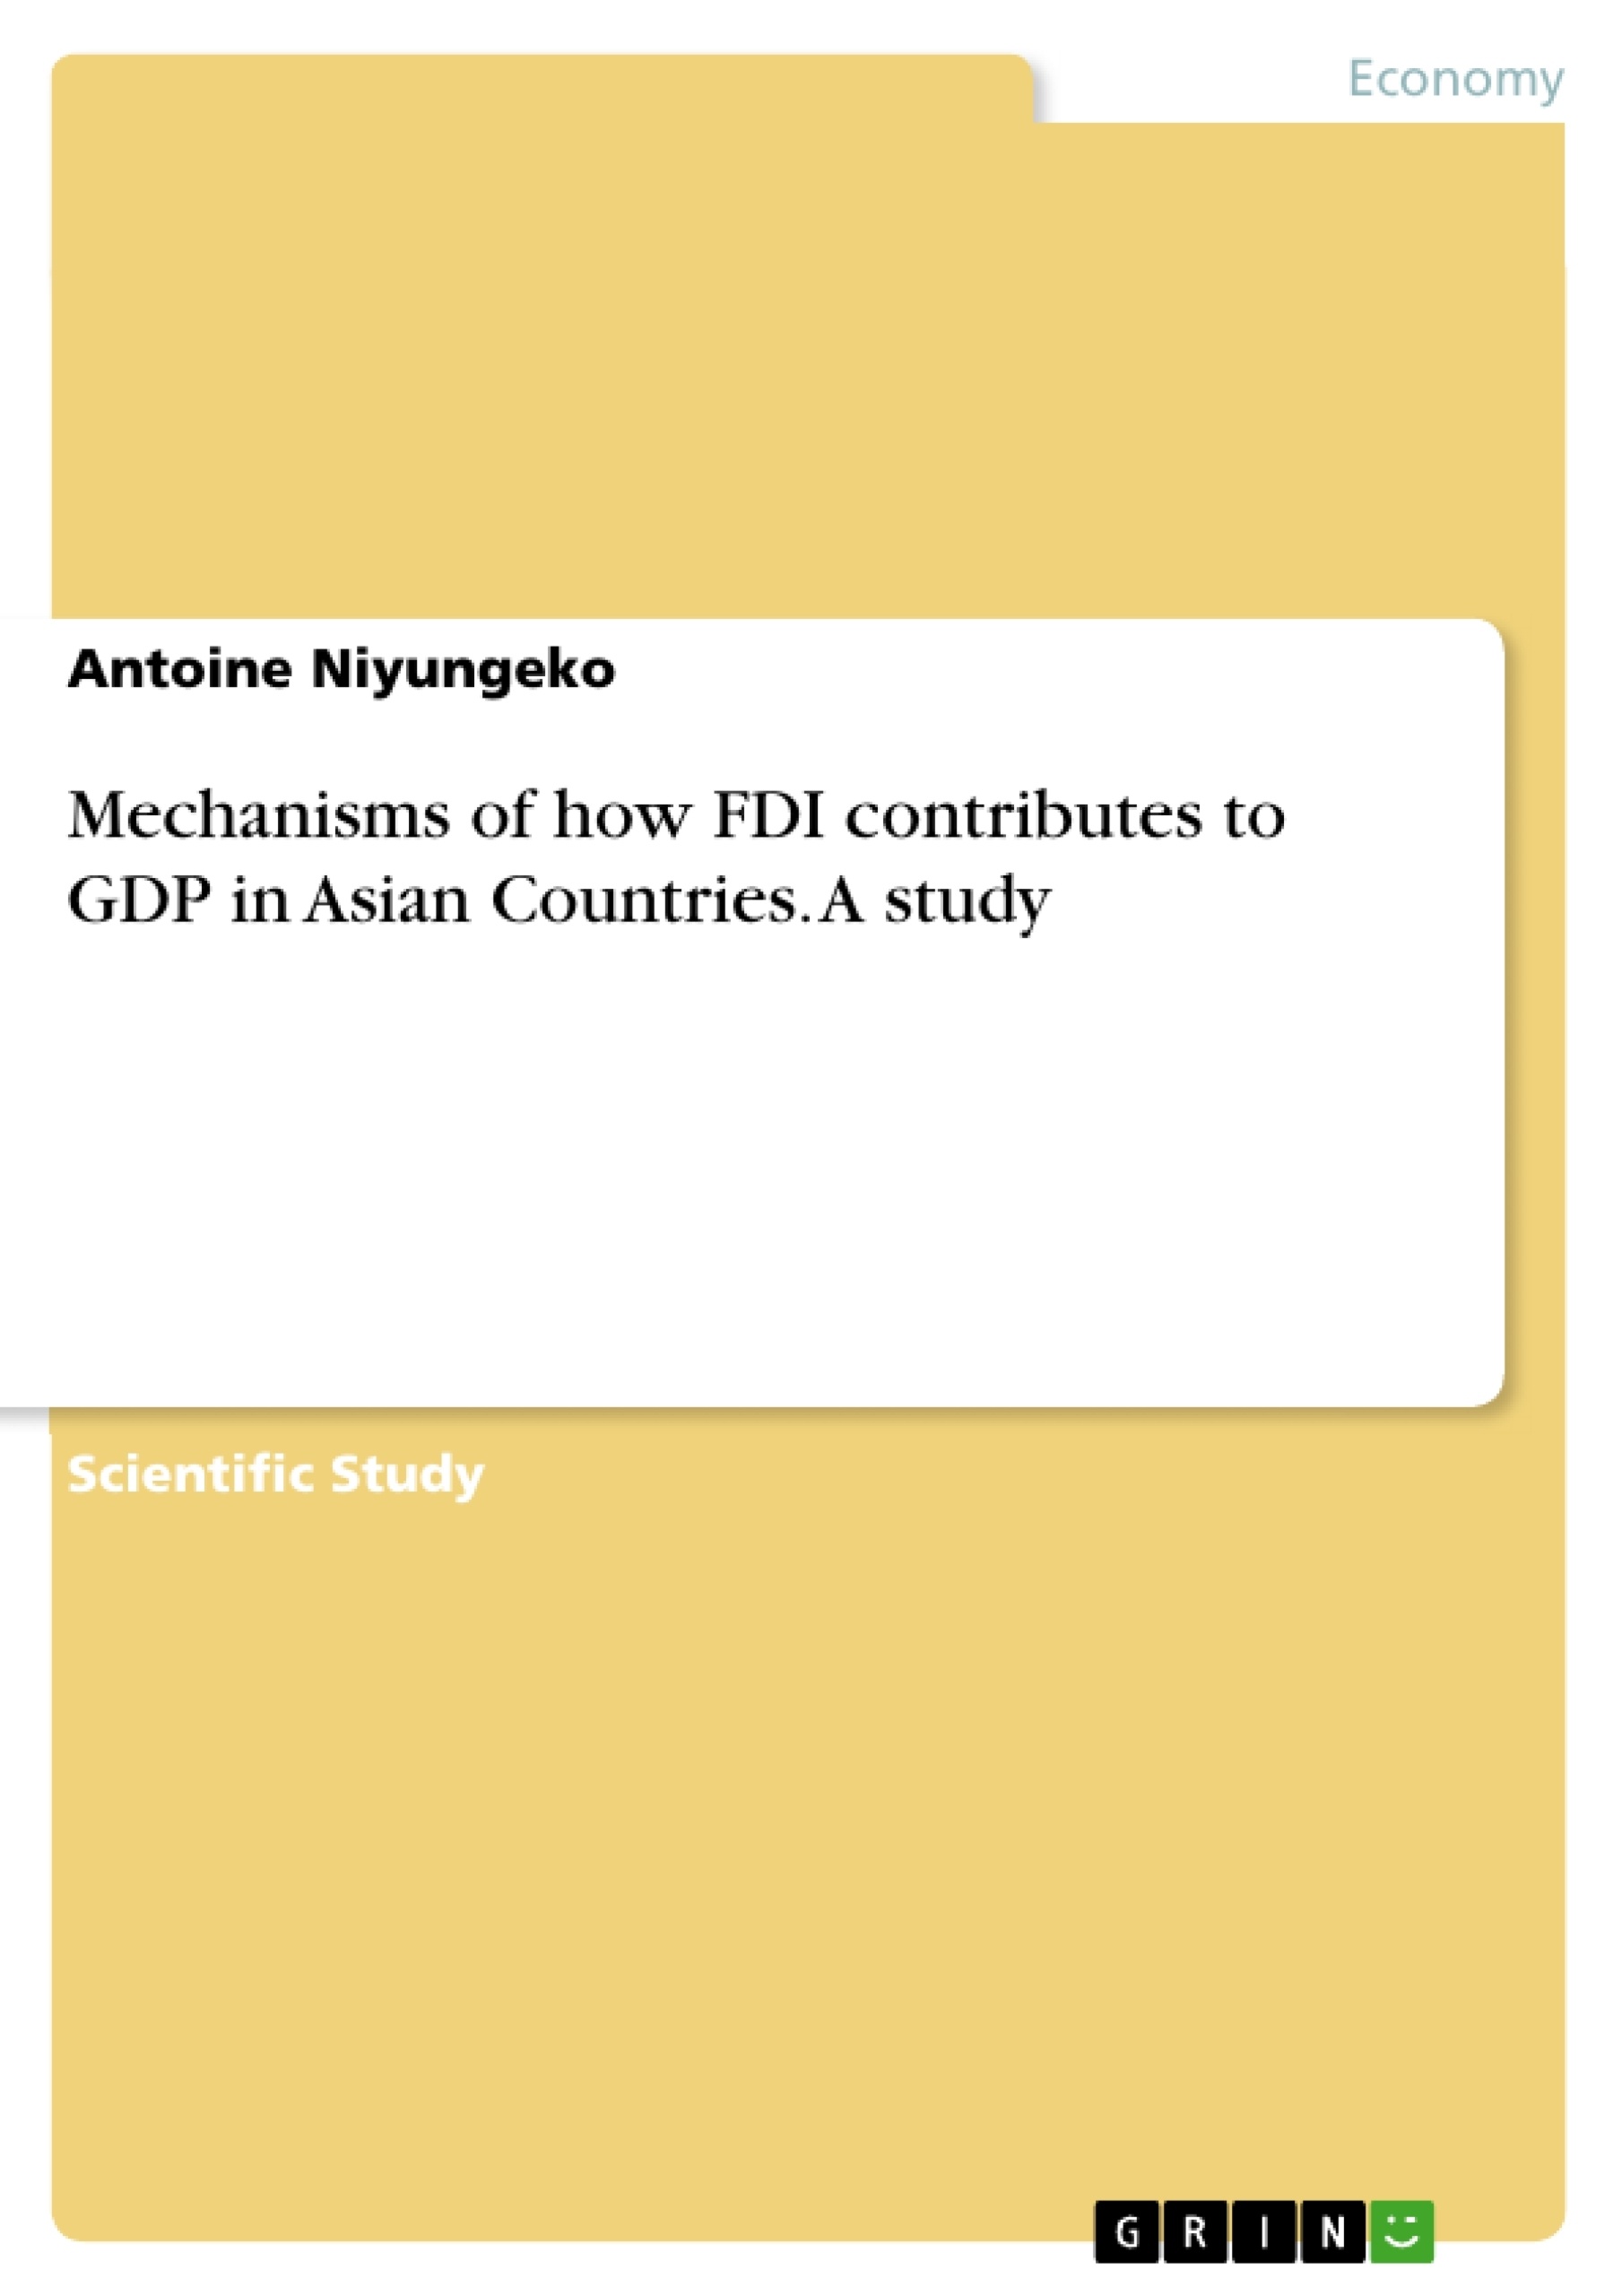 Title: Mechanisms of how FDI contributes to GDP in Asian Countries. A study